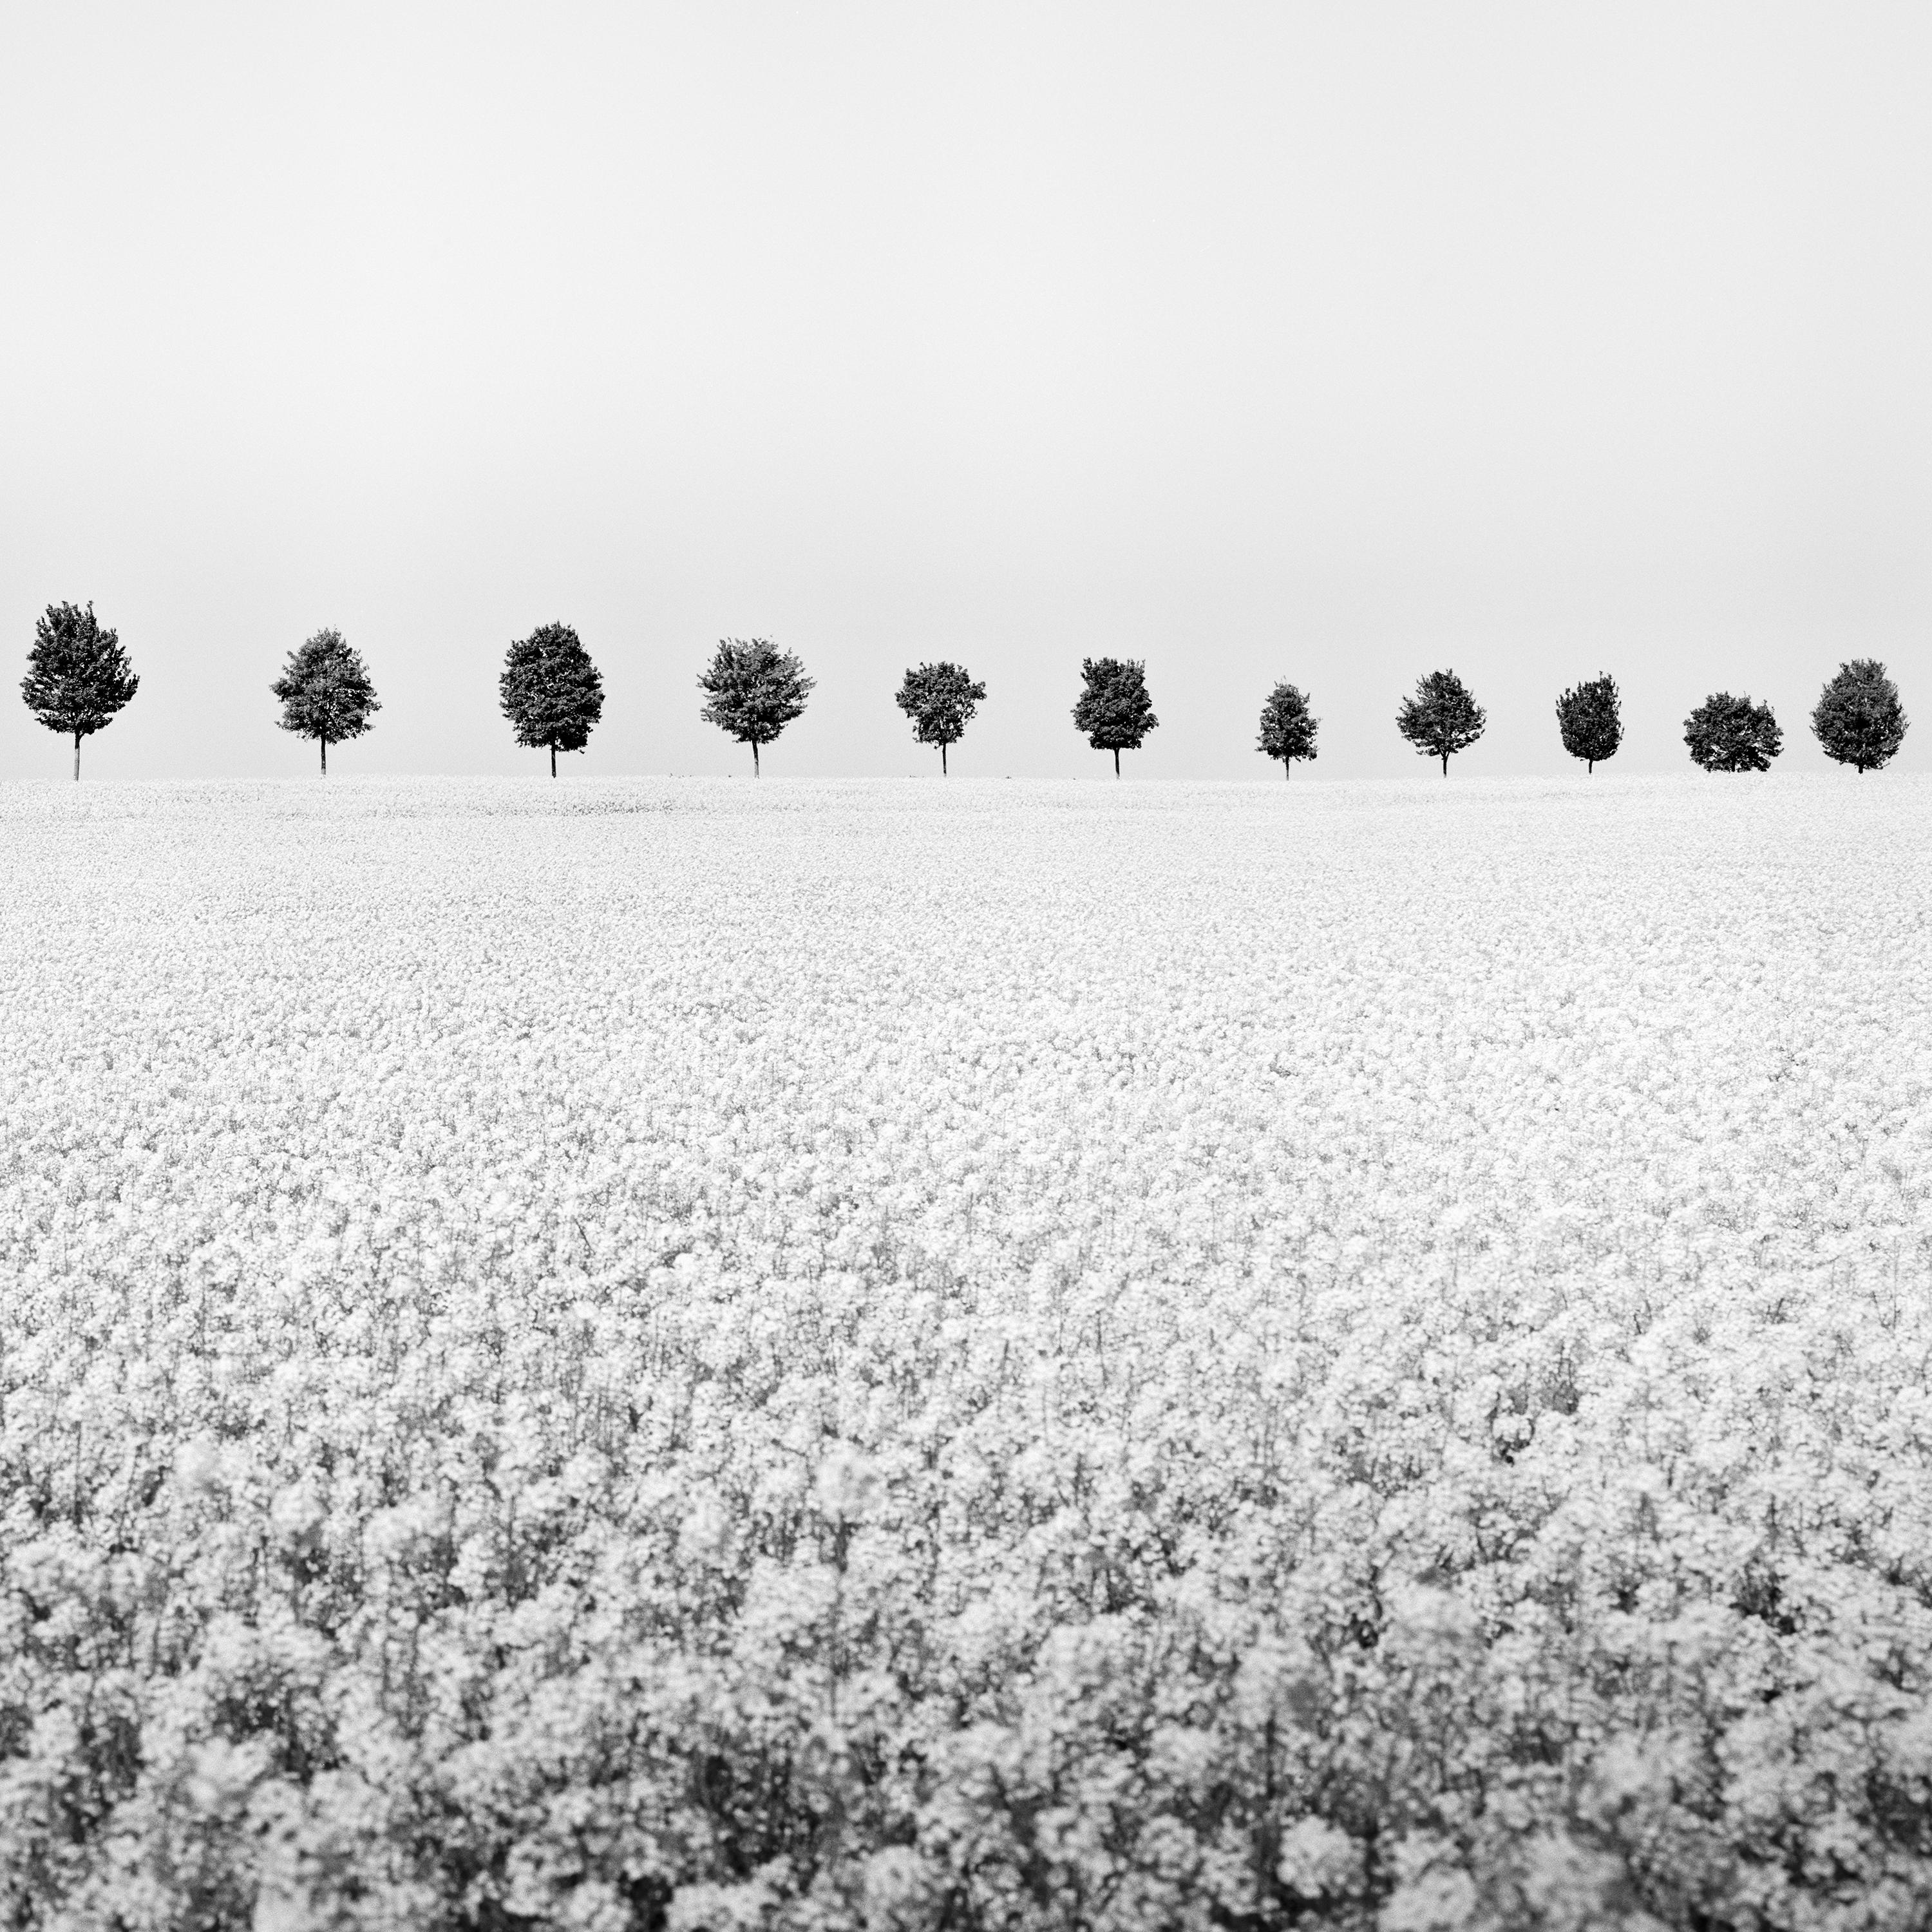 Brassica Napus row of trees black white minimalist landscape fineart photography For Sale 4